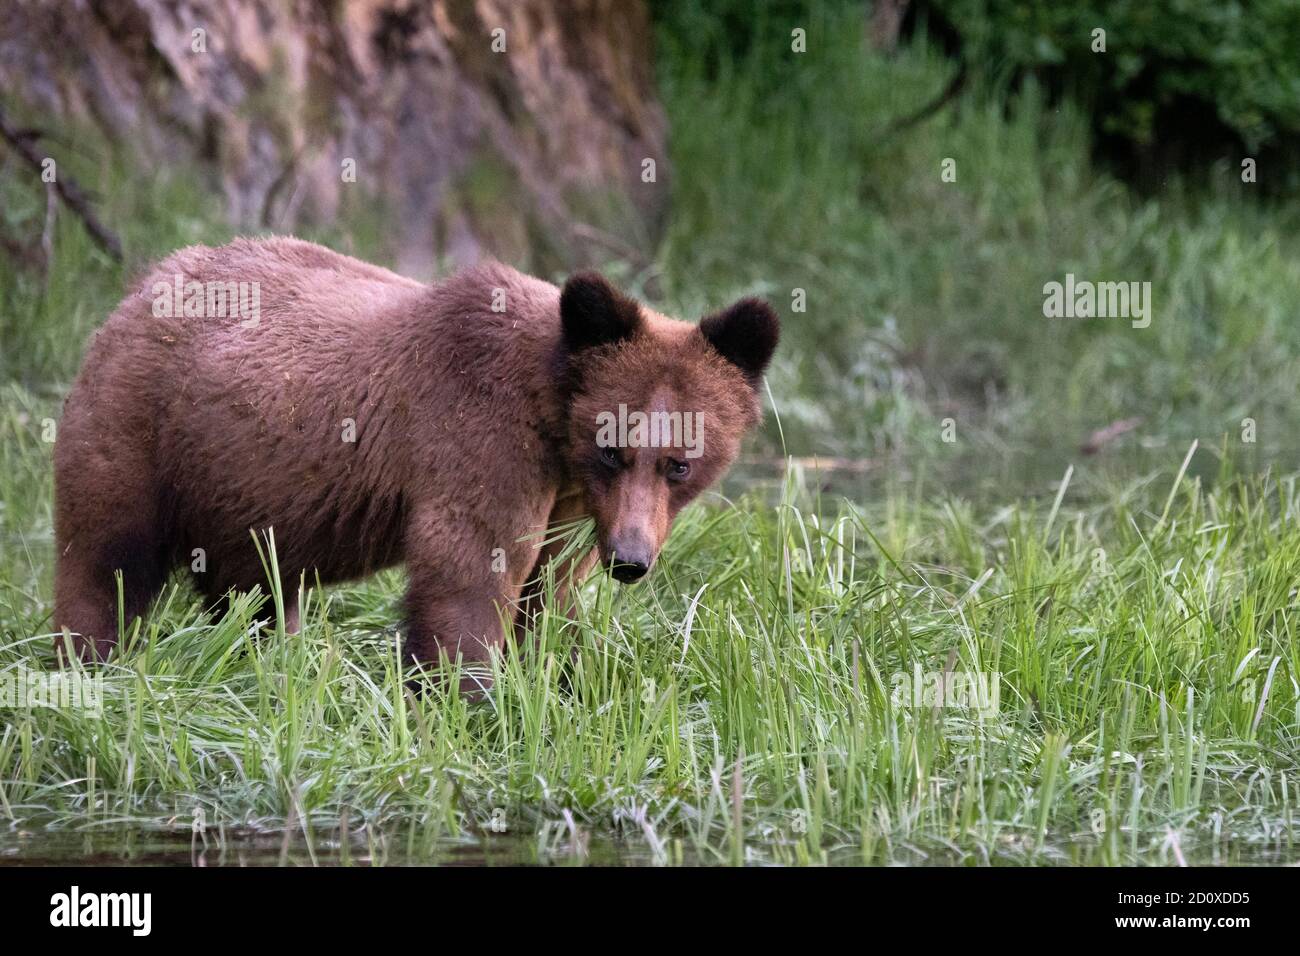 Adult grizzly bear feeding on sedge grass by the shoreline, Khutzeymateen Inlet, BC Stock Photo